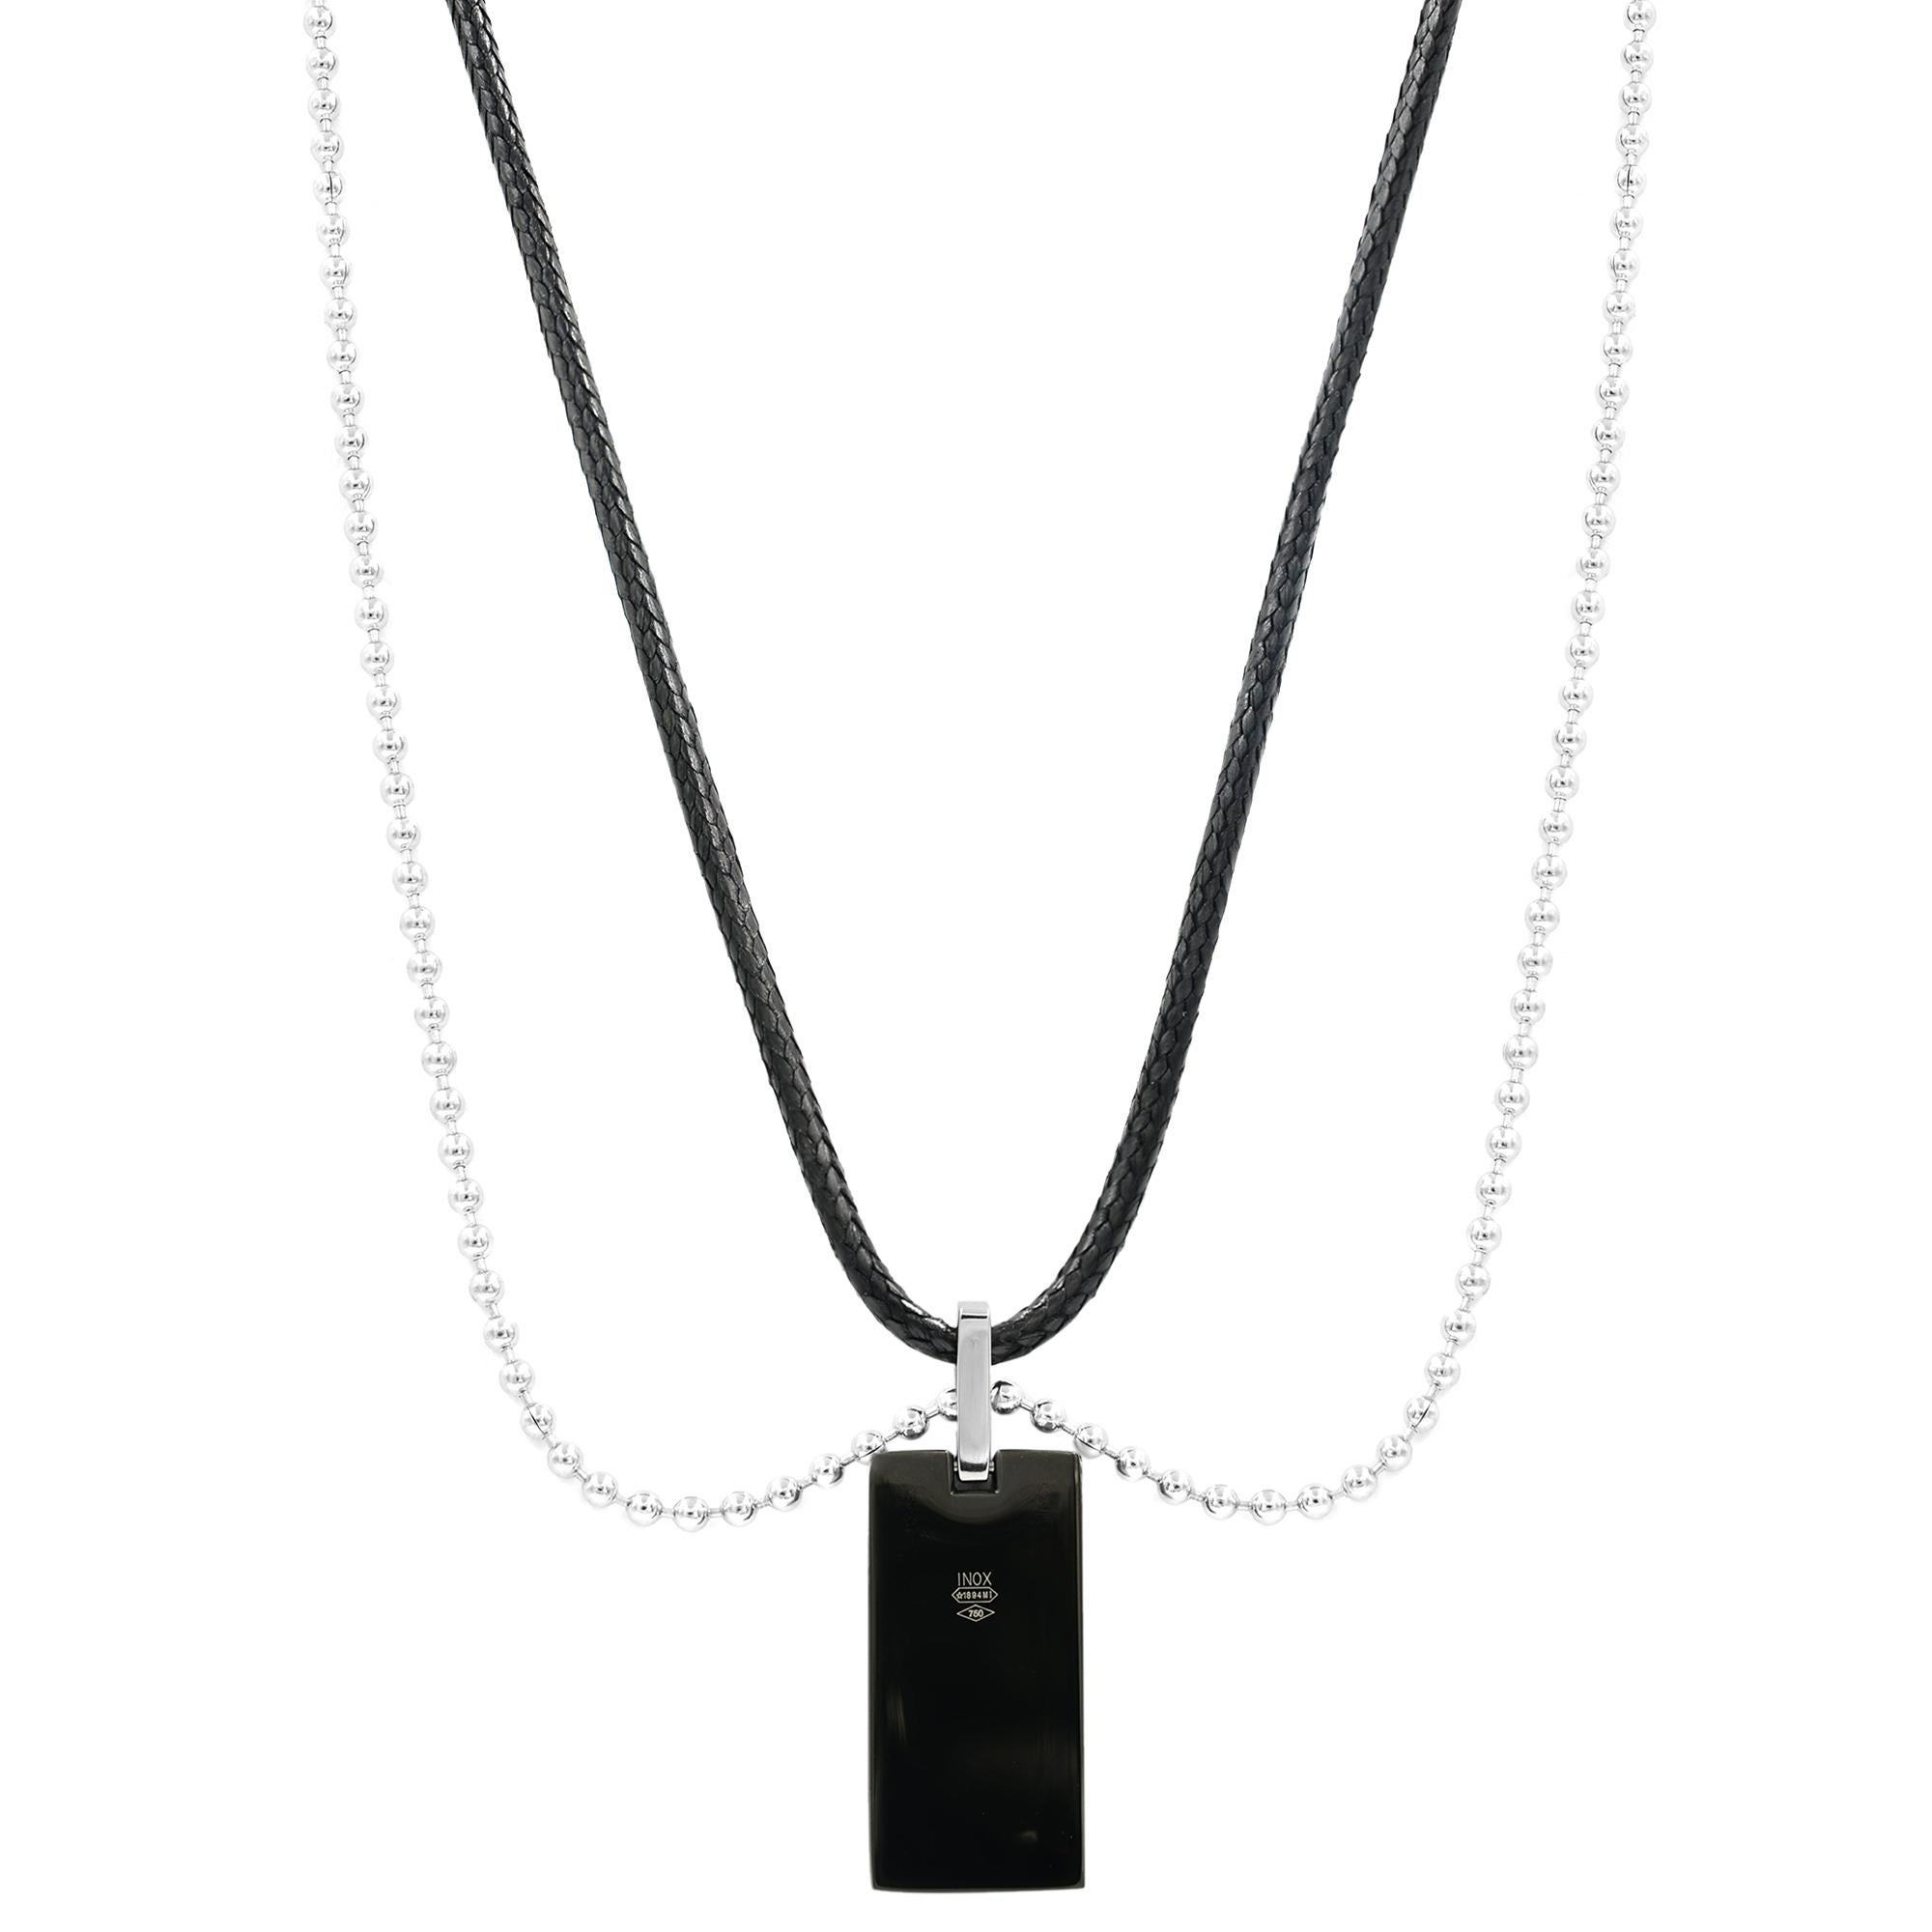 Modern Bliss by Damiani Uomo Diamond Pendant Necklace Black Steel 18K Yellow Gold For Sale